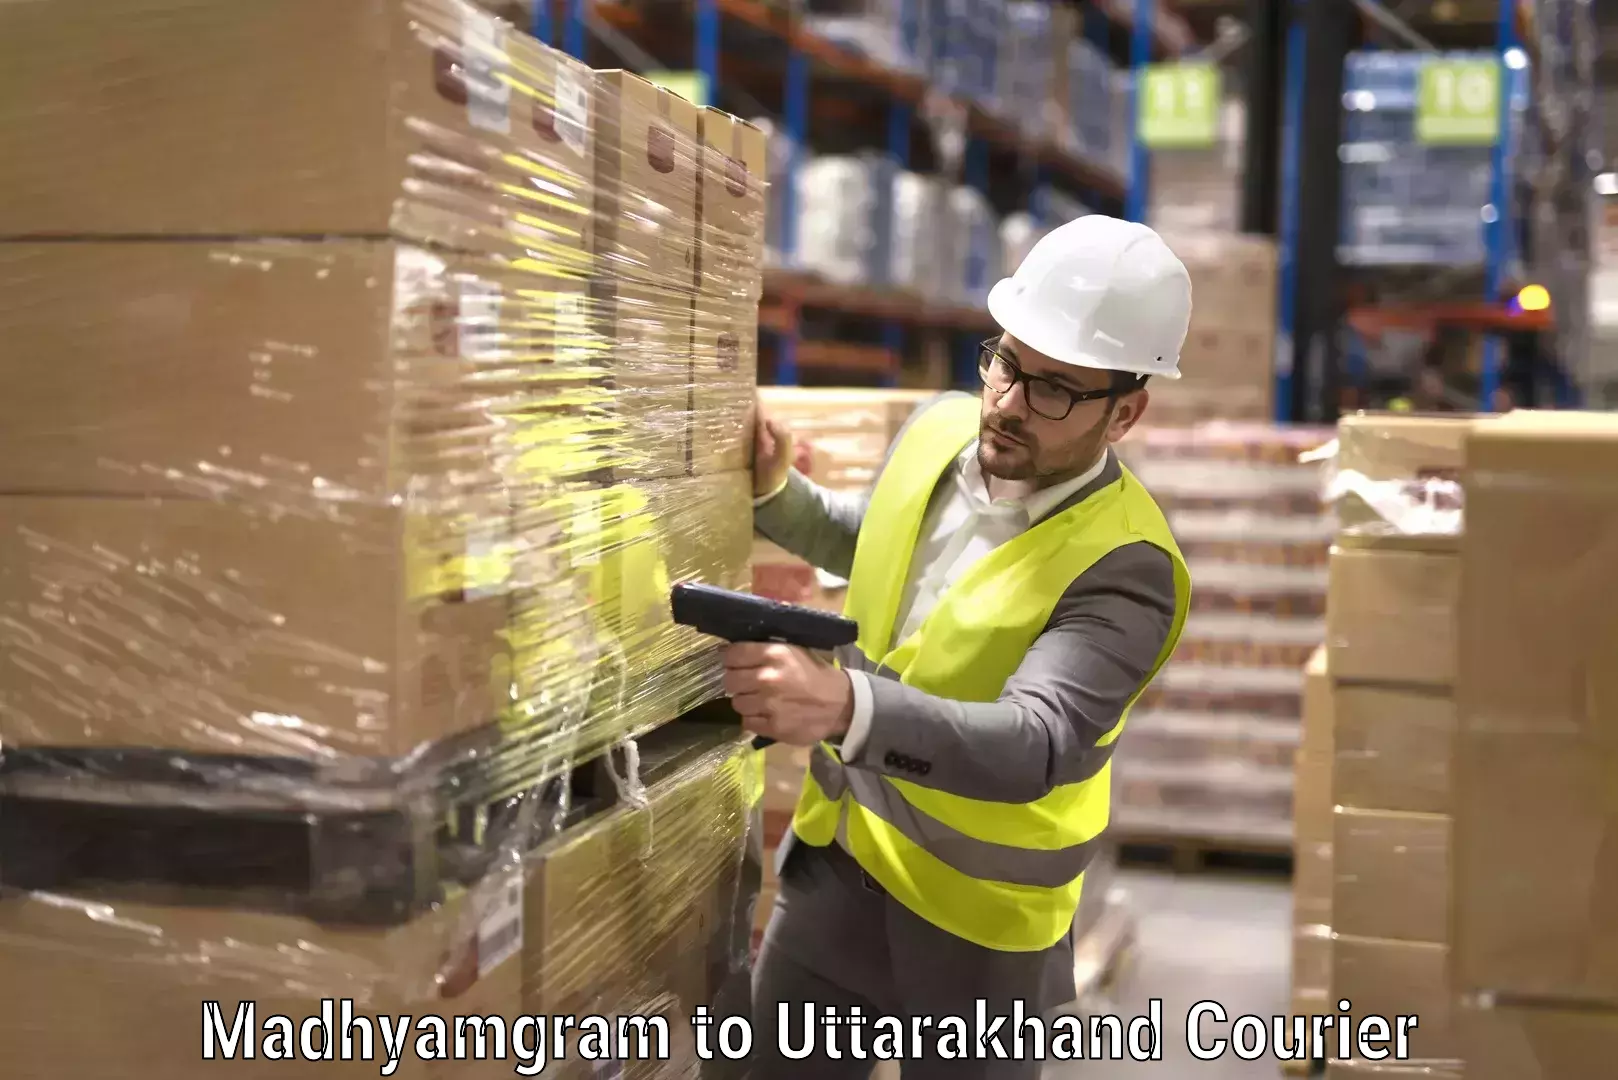 Customized relocation services in Madhyamgram to Uttarakhand